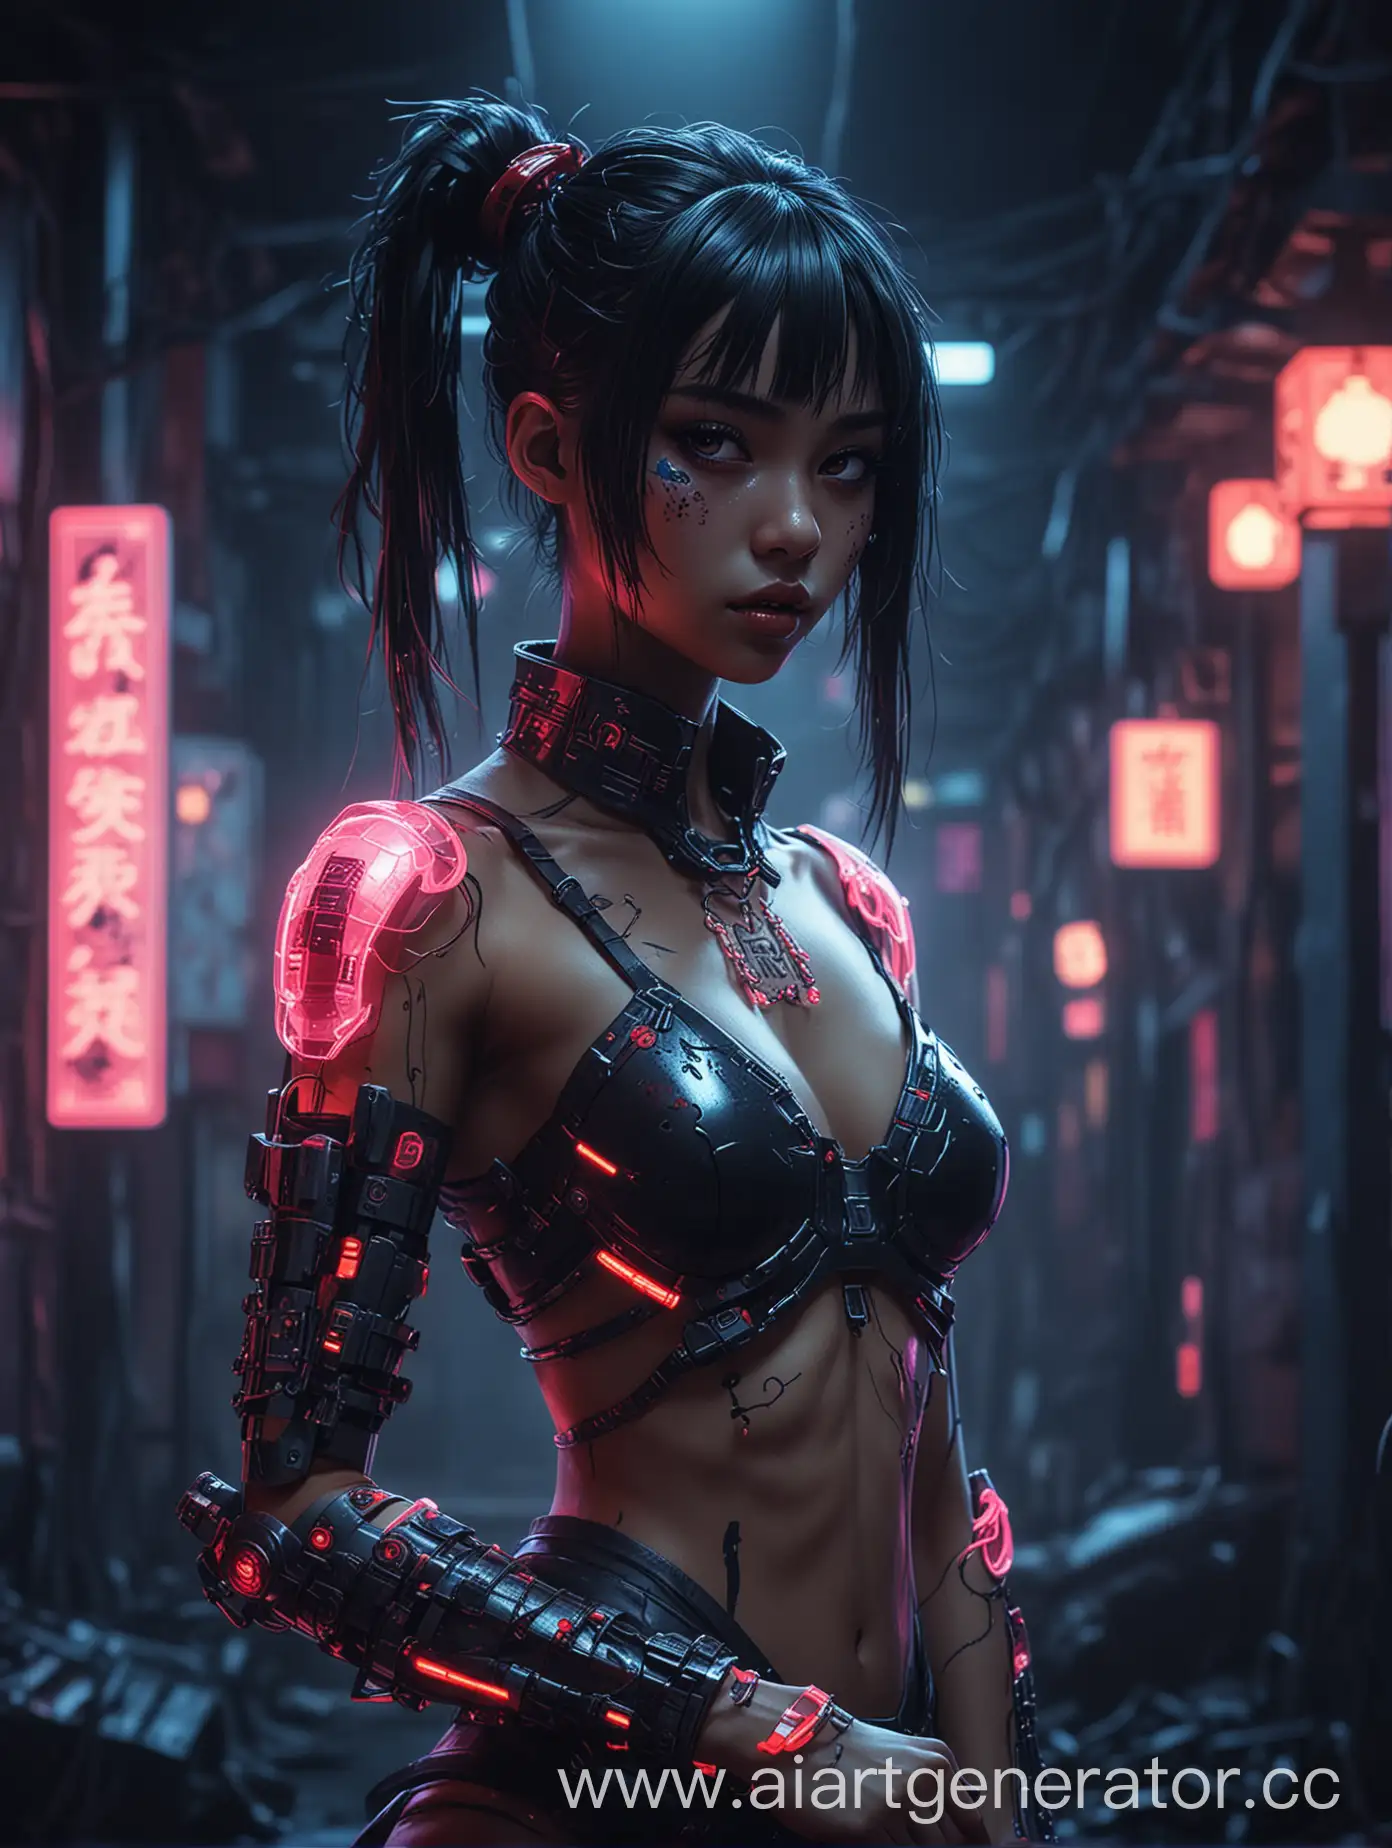 a dark girl with a china arm, a costume in a modern style glowing neon, a background behind in the style of horror and fantasy, a lot of blurry details in the style of cyberpunk anime